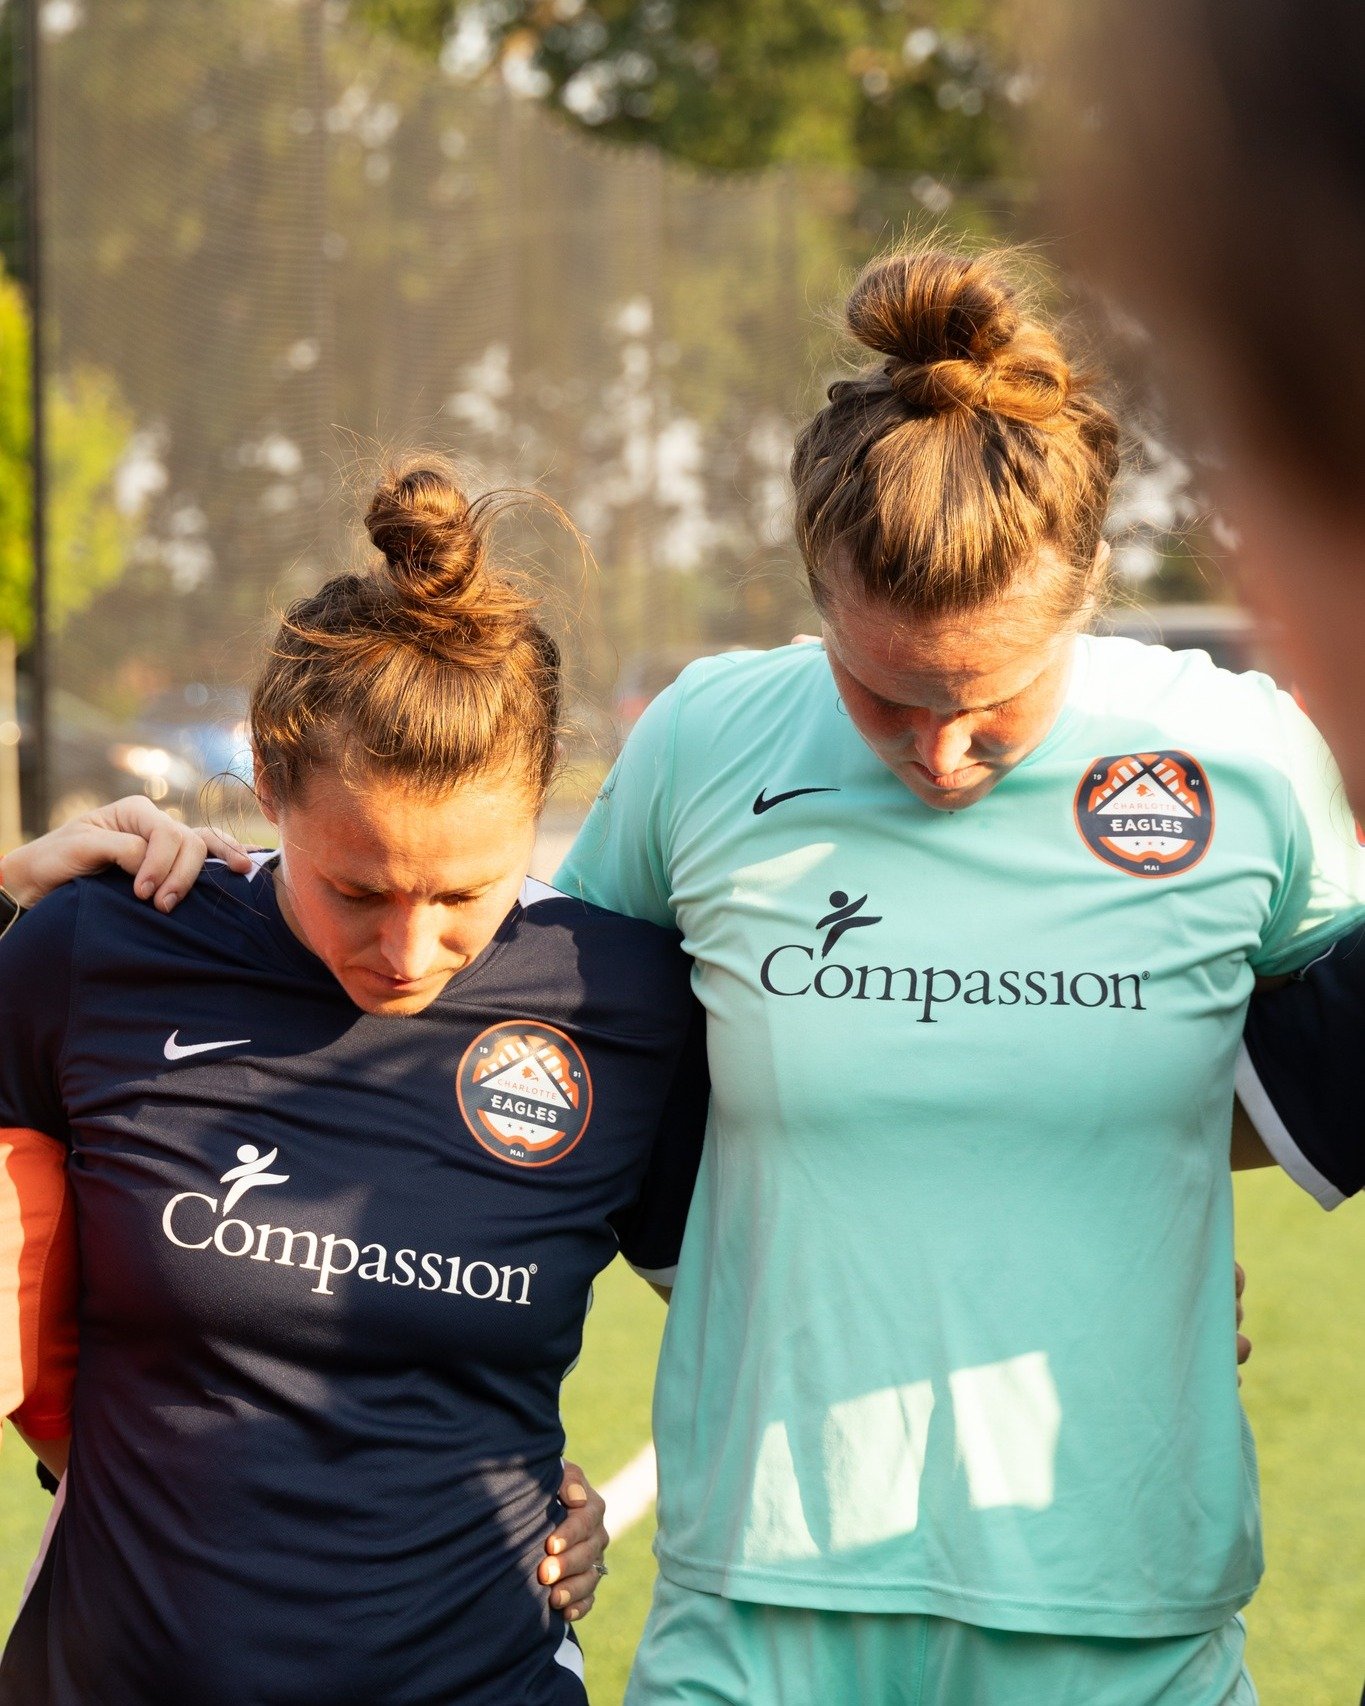 Join us in prayer for our Charlotte Lady Eagles players, staff, and our athletic training interns who are headed to Colombia to play soccer and serve in local communities. 

#SoliDeoGloria